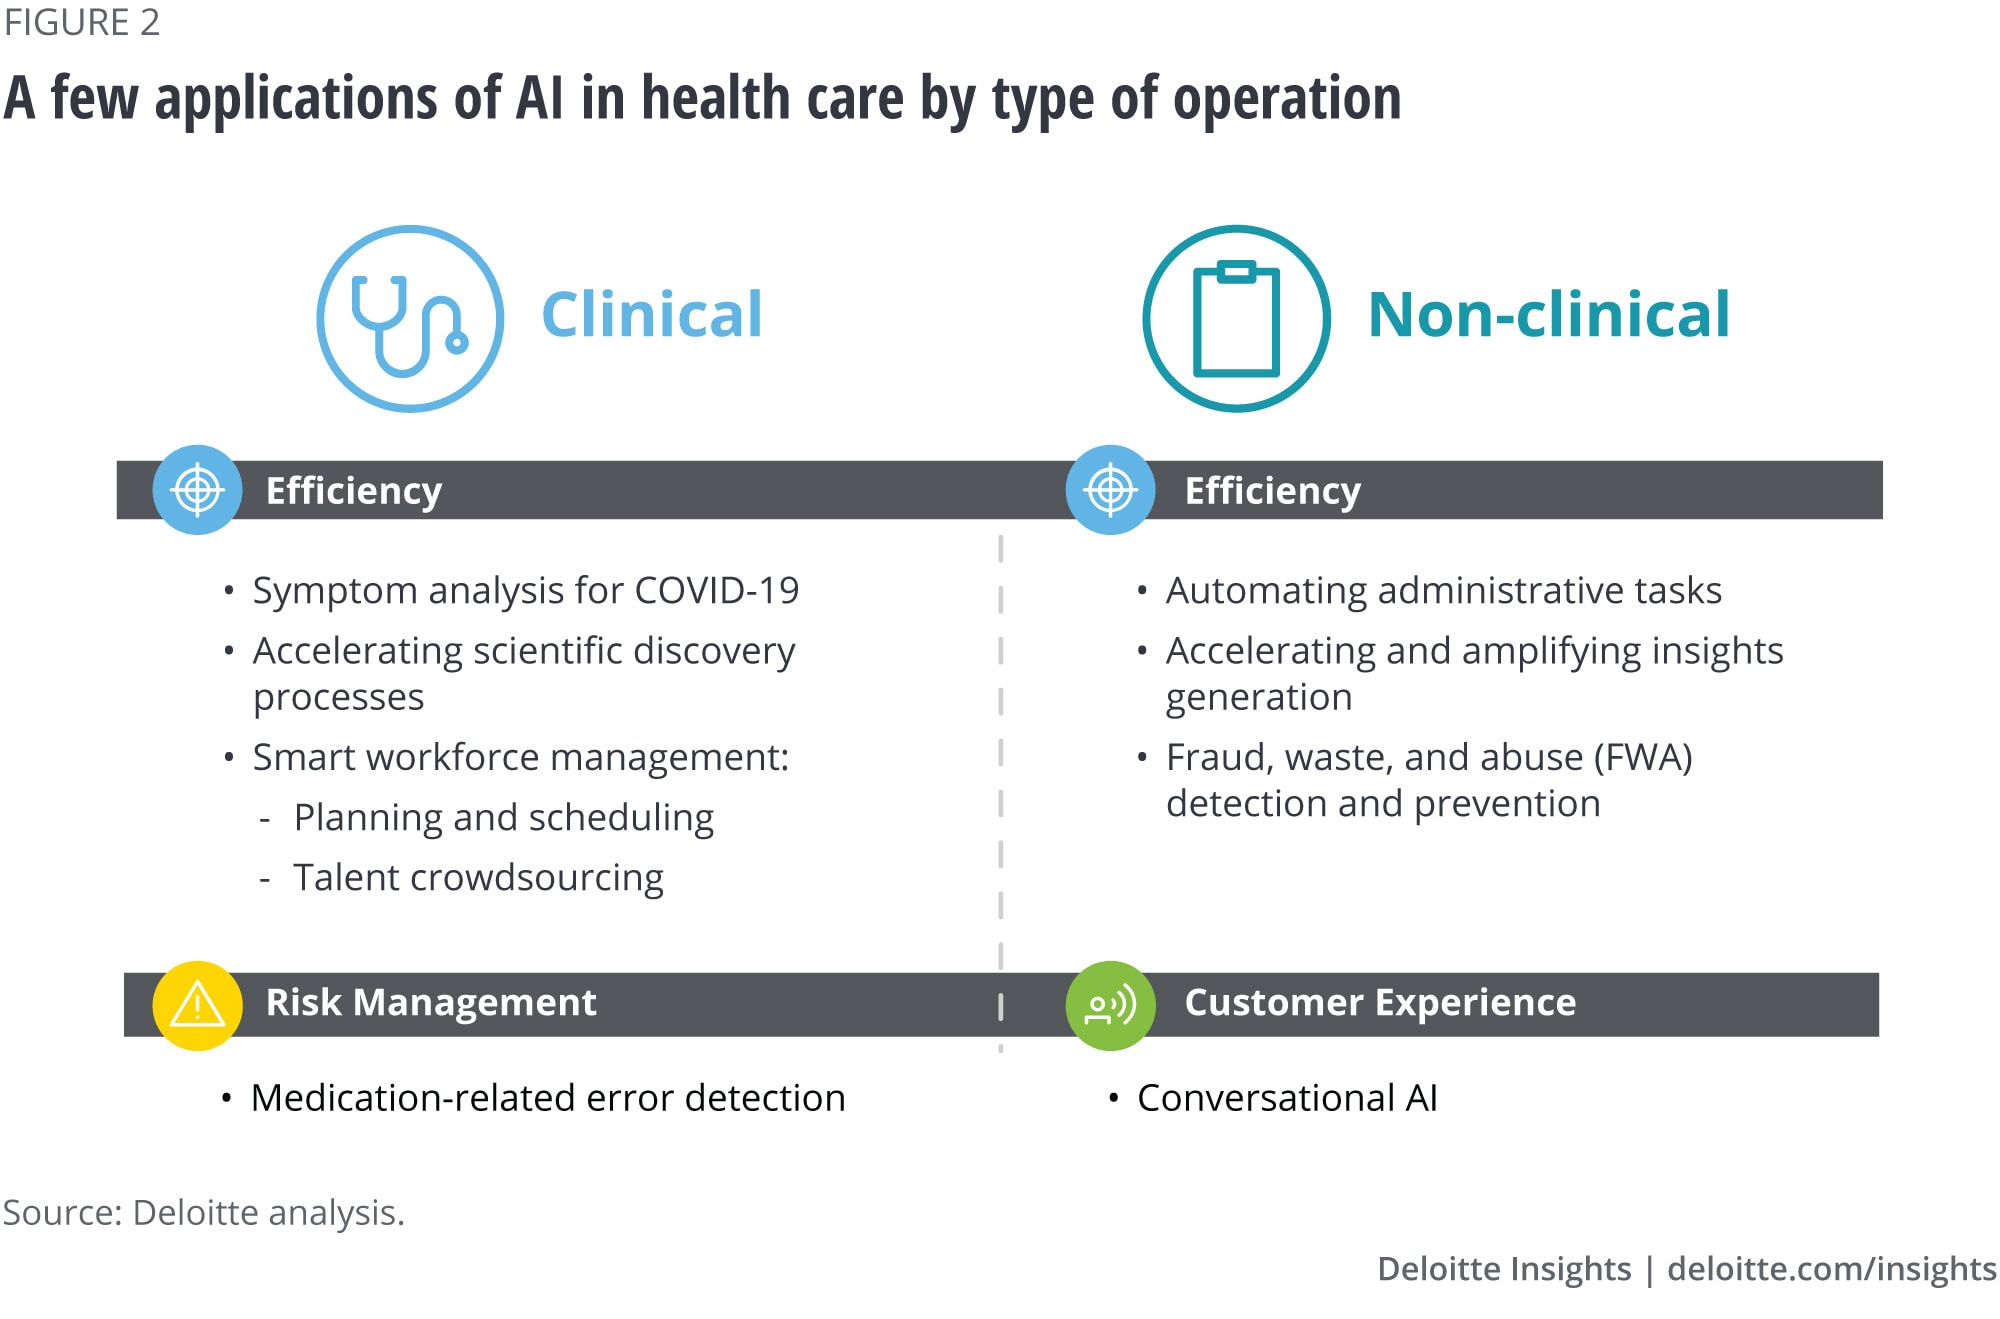 A few applications of AI in health care by type of operation